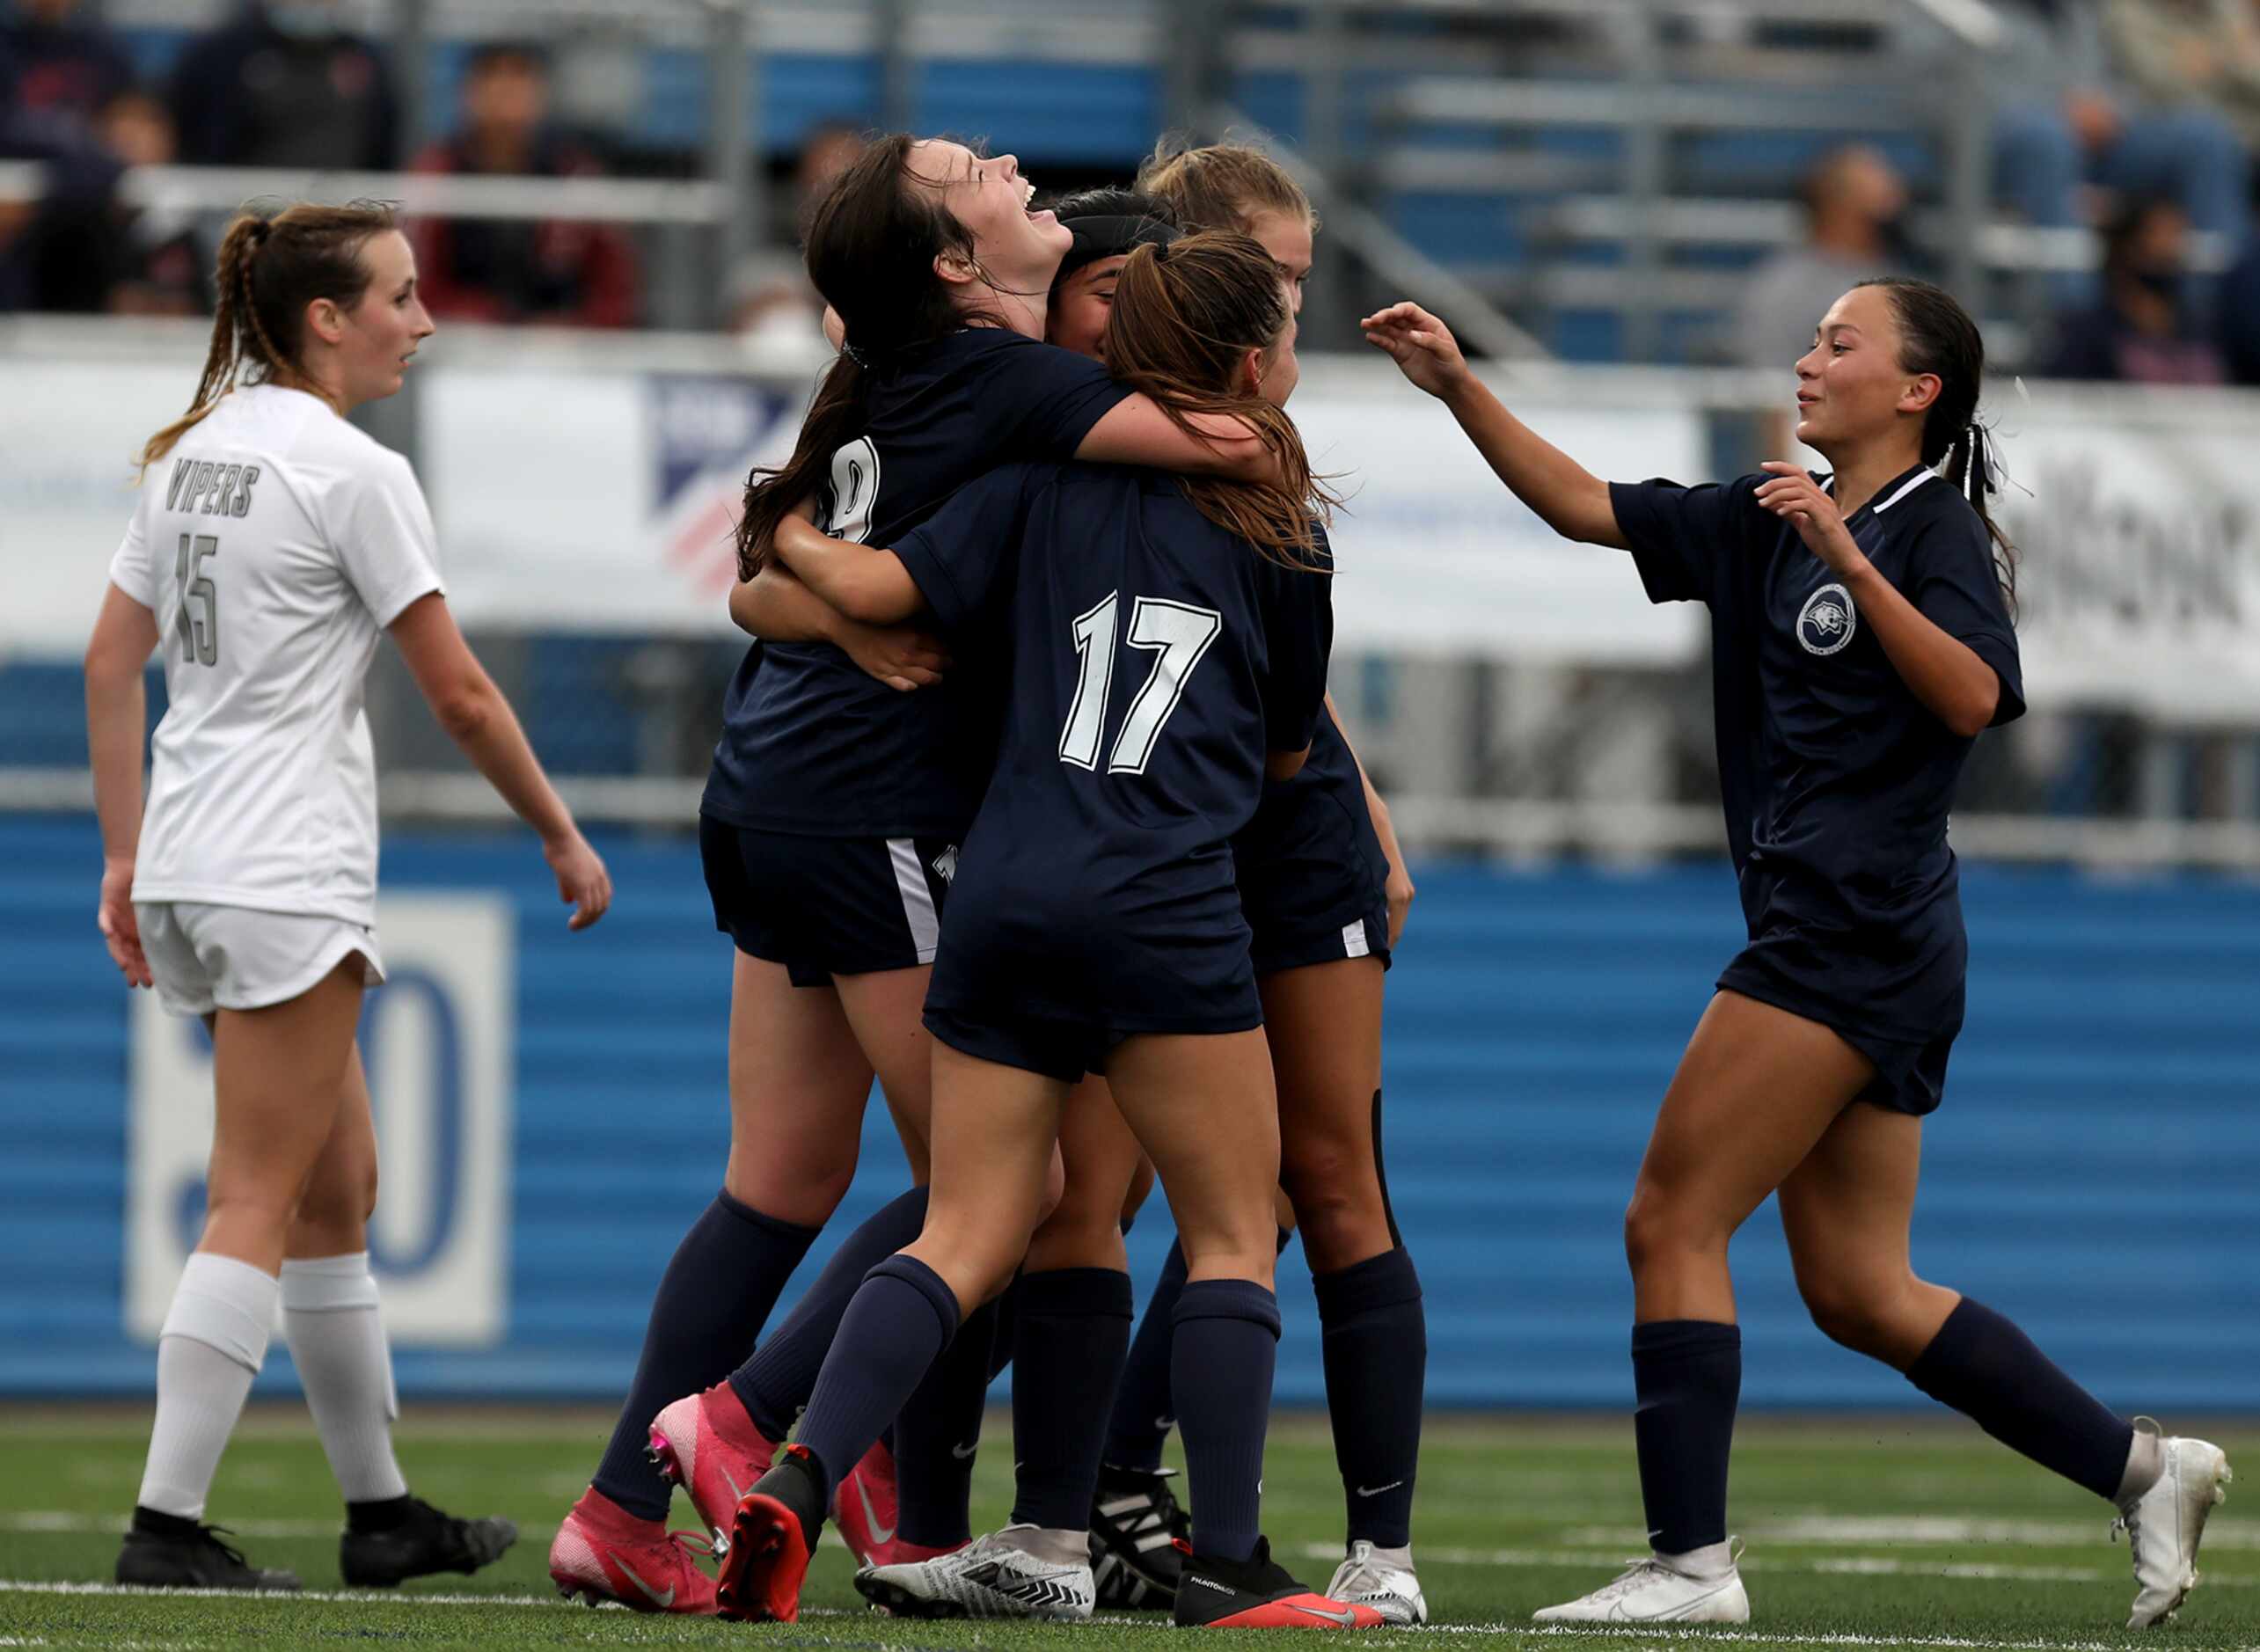 Lewisville Flower Mound players celebrate after a goal against Austin Vandegrift during...